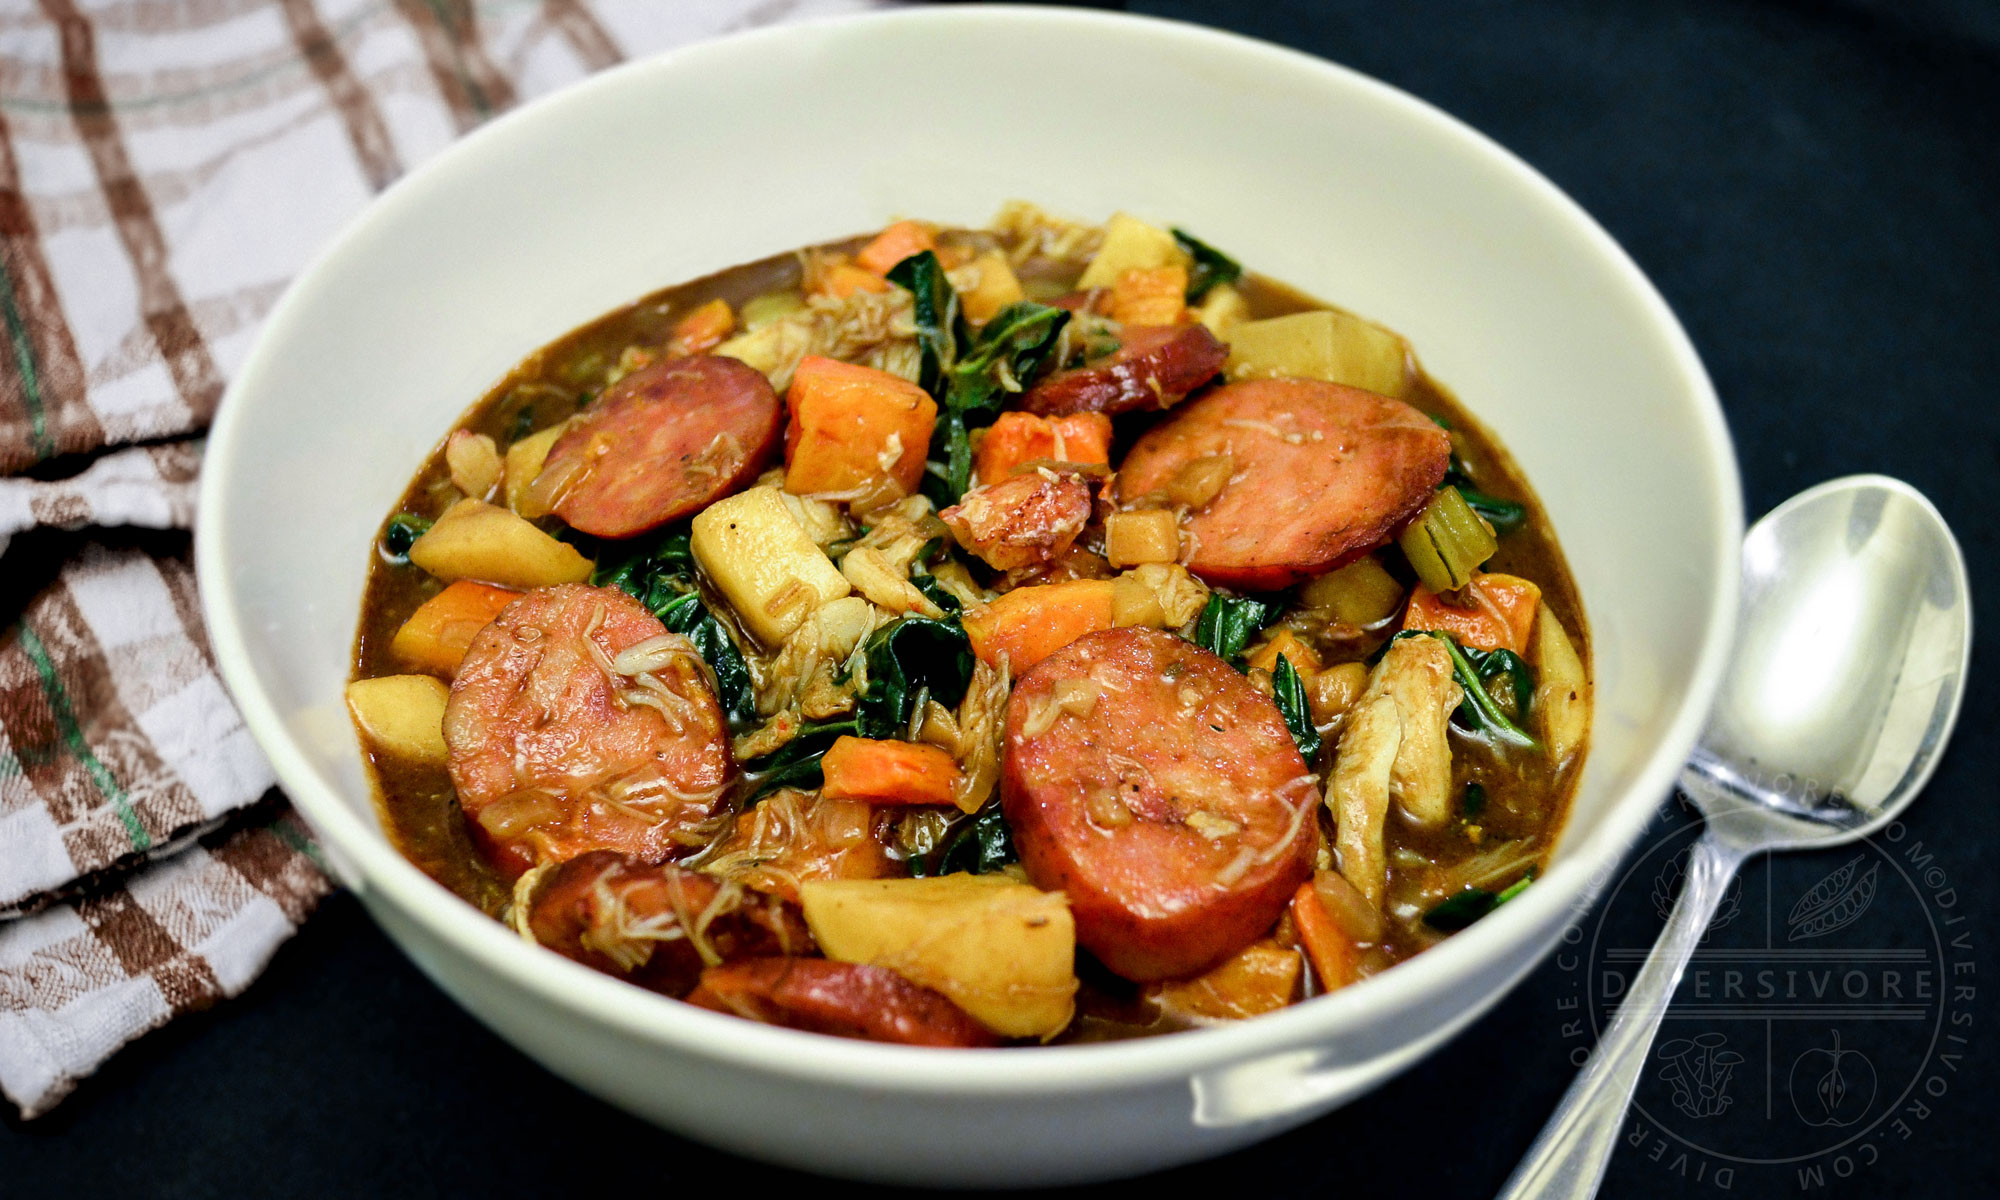 Featured image for “Winter Gumbo with Crab & Sunchokes”